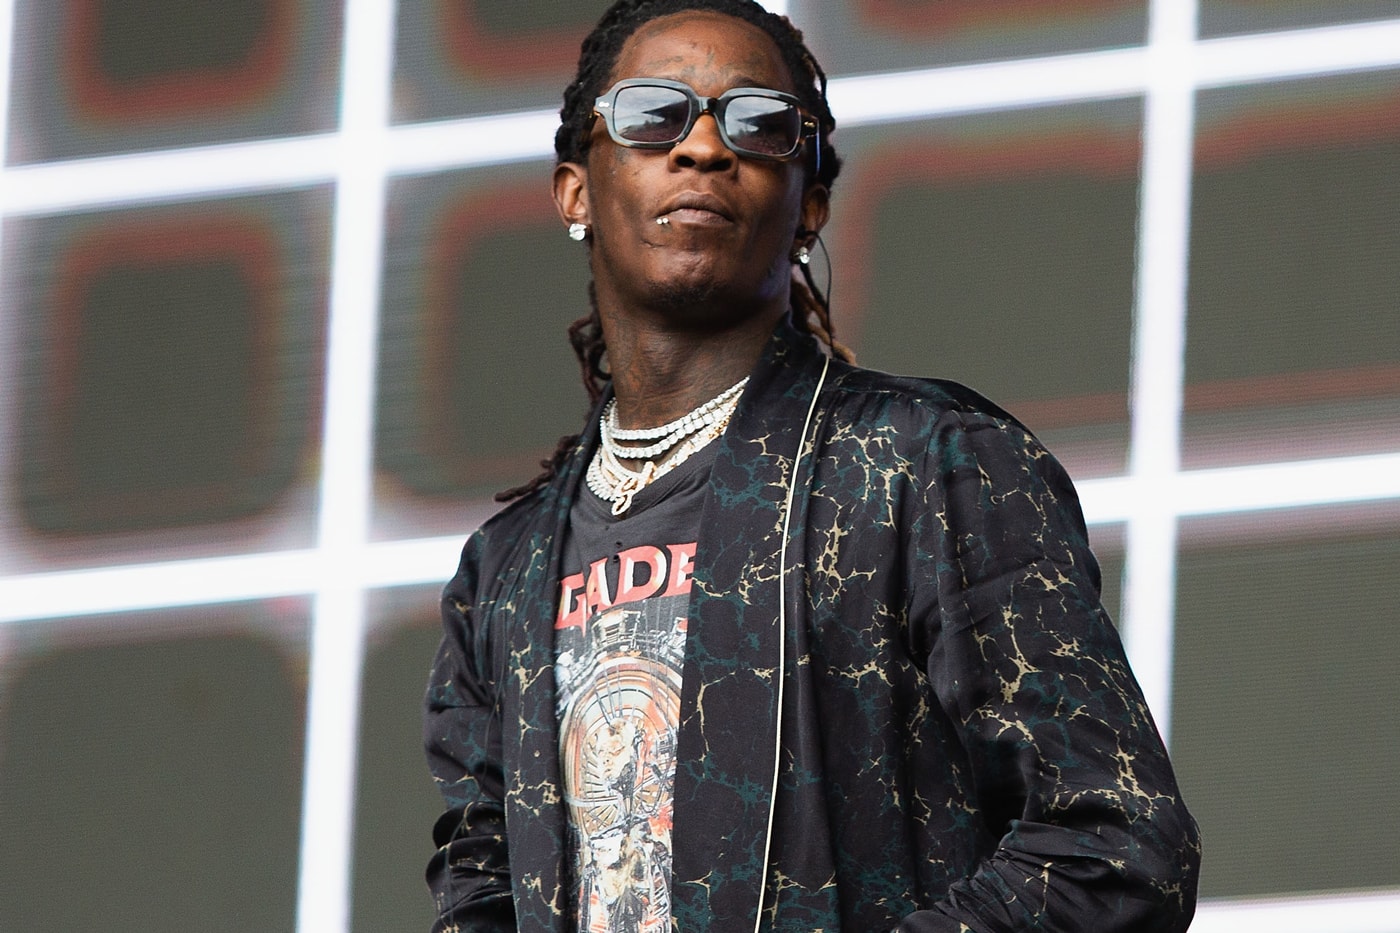 Young Thug 24hrs A Trak Falcons Ride for Me Single Stream 2018 february 7 release date info debut premiere spotify itunes apple music tidal soundcloud